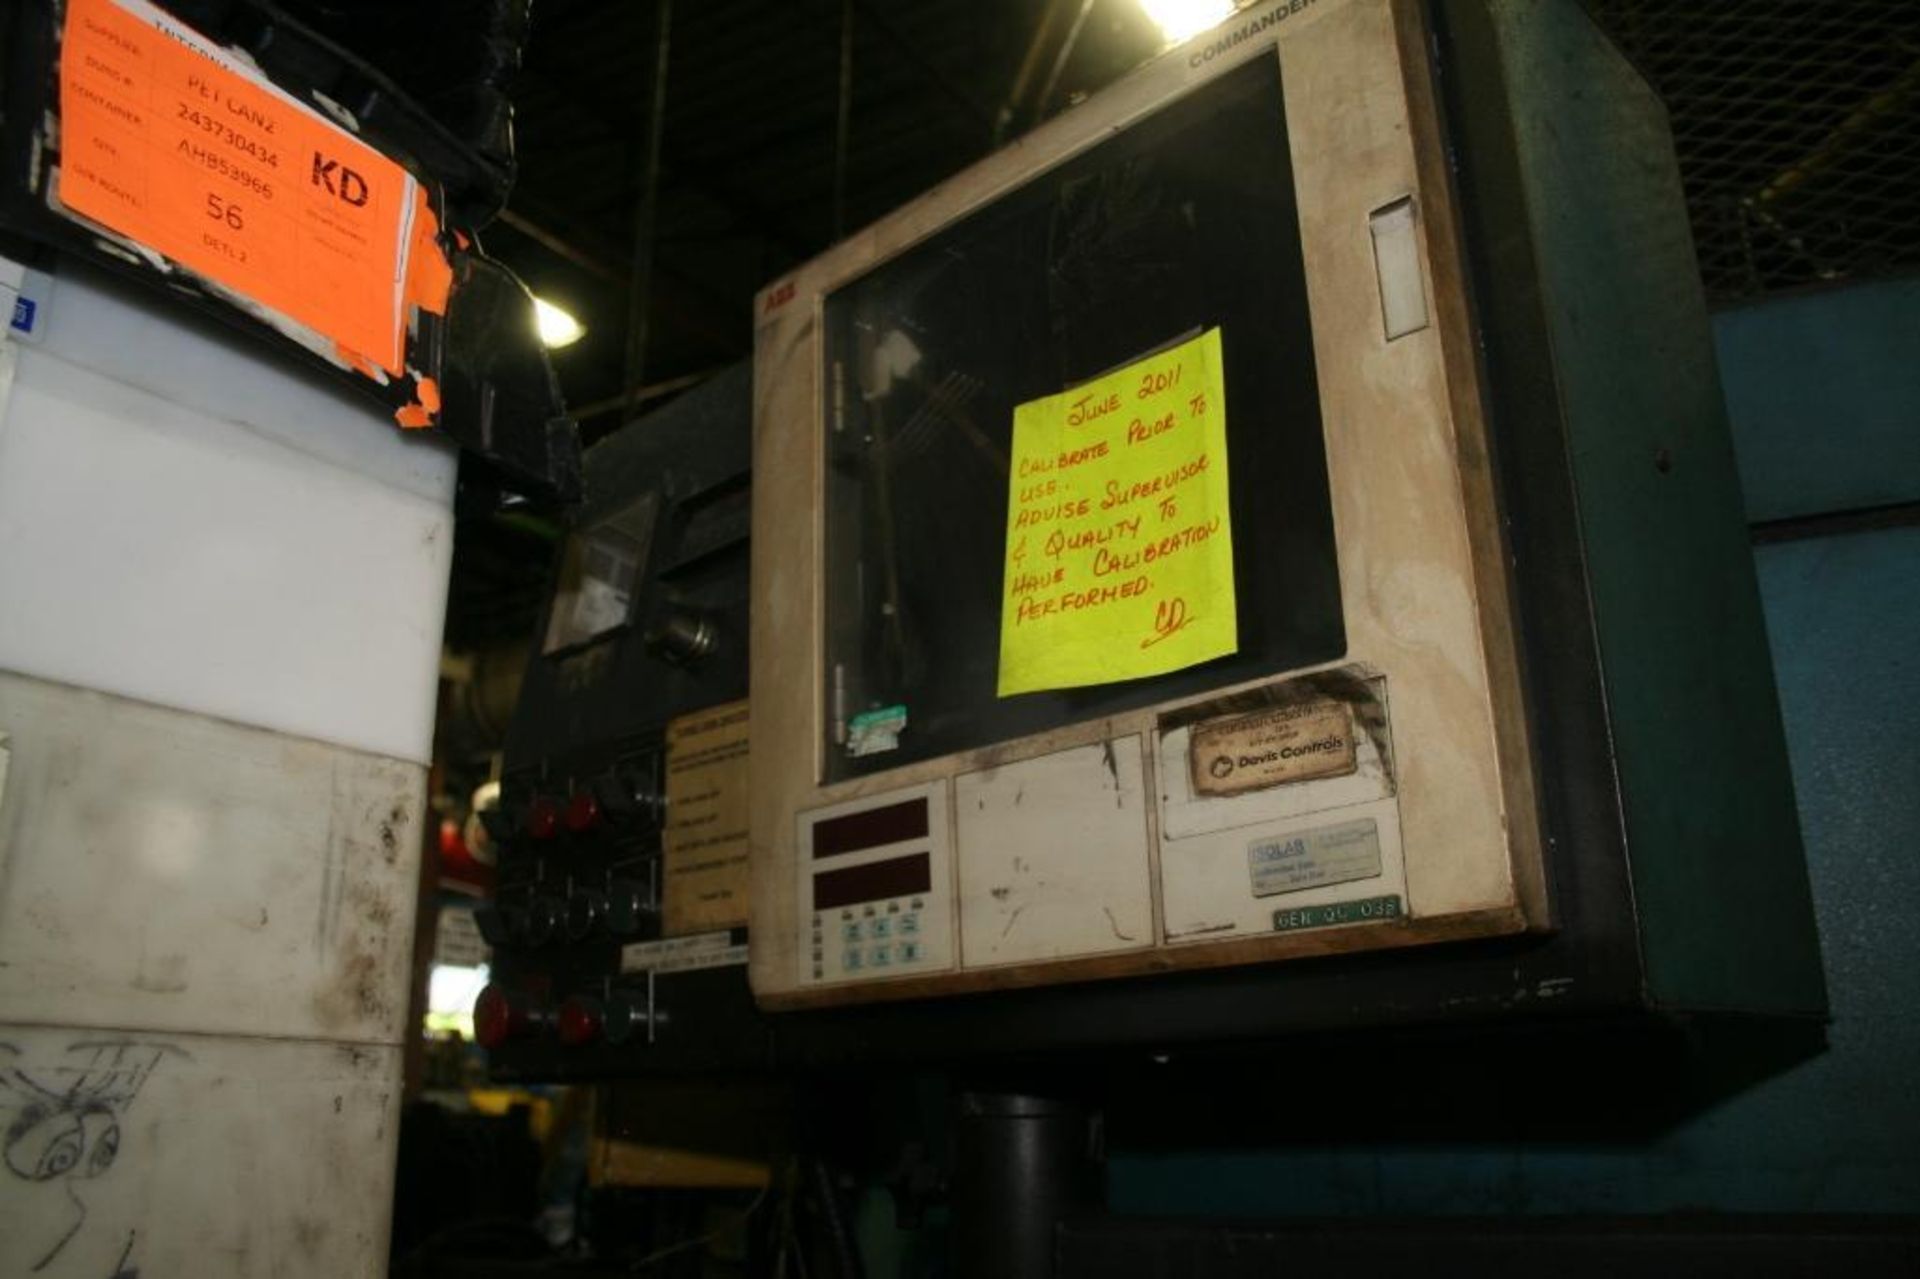 Pyromaitre Turbo Rotary Oven Model TD 60-IG, Pyro Oven, Serial# 980103, 4 Lane, Located at 208 Wigle - Image 2 of 10